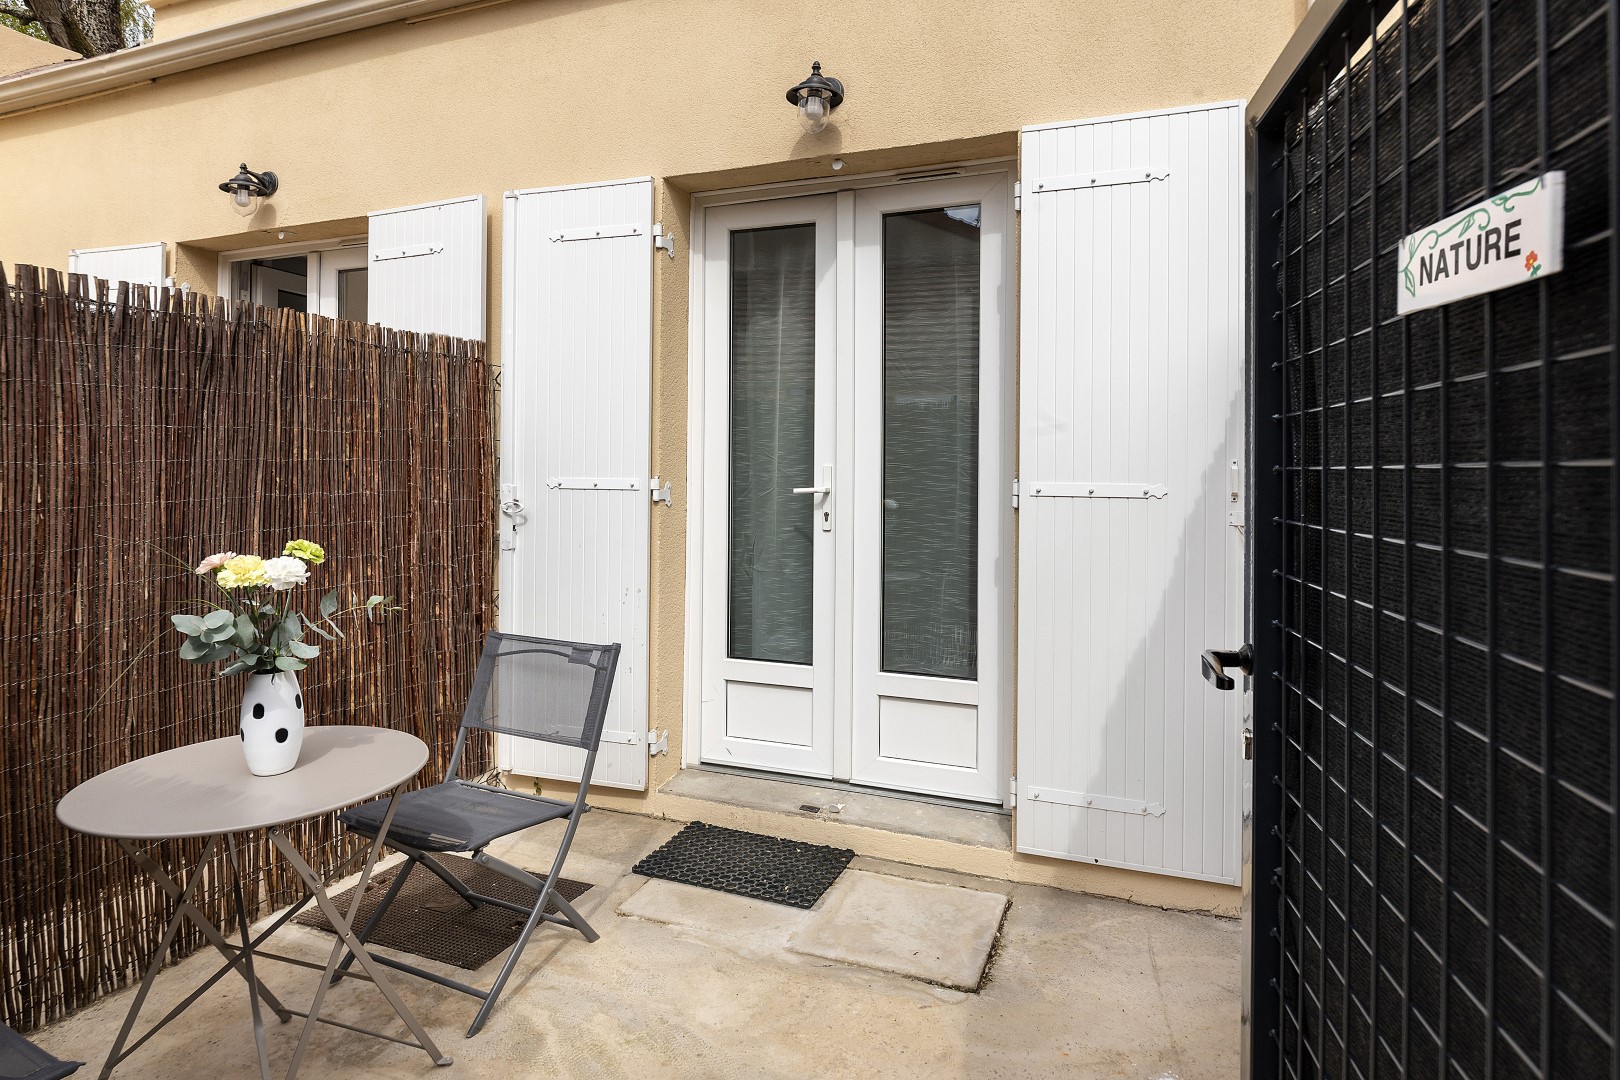 Terrasse privative, location meublée, hotel a Marcoussis Airbnb booking.com